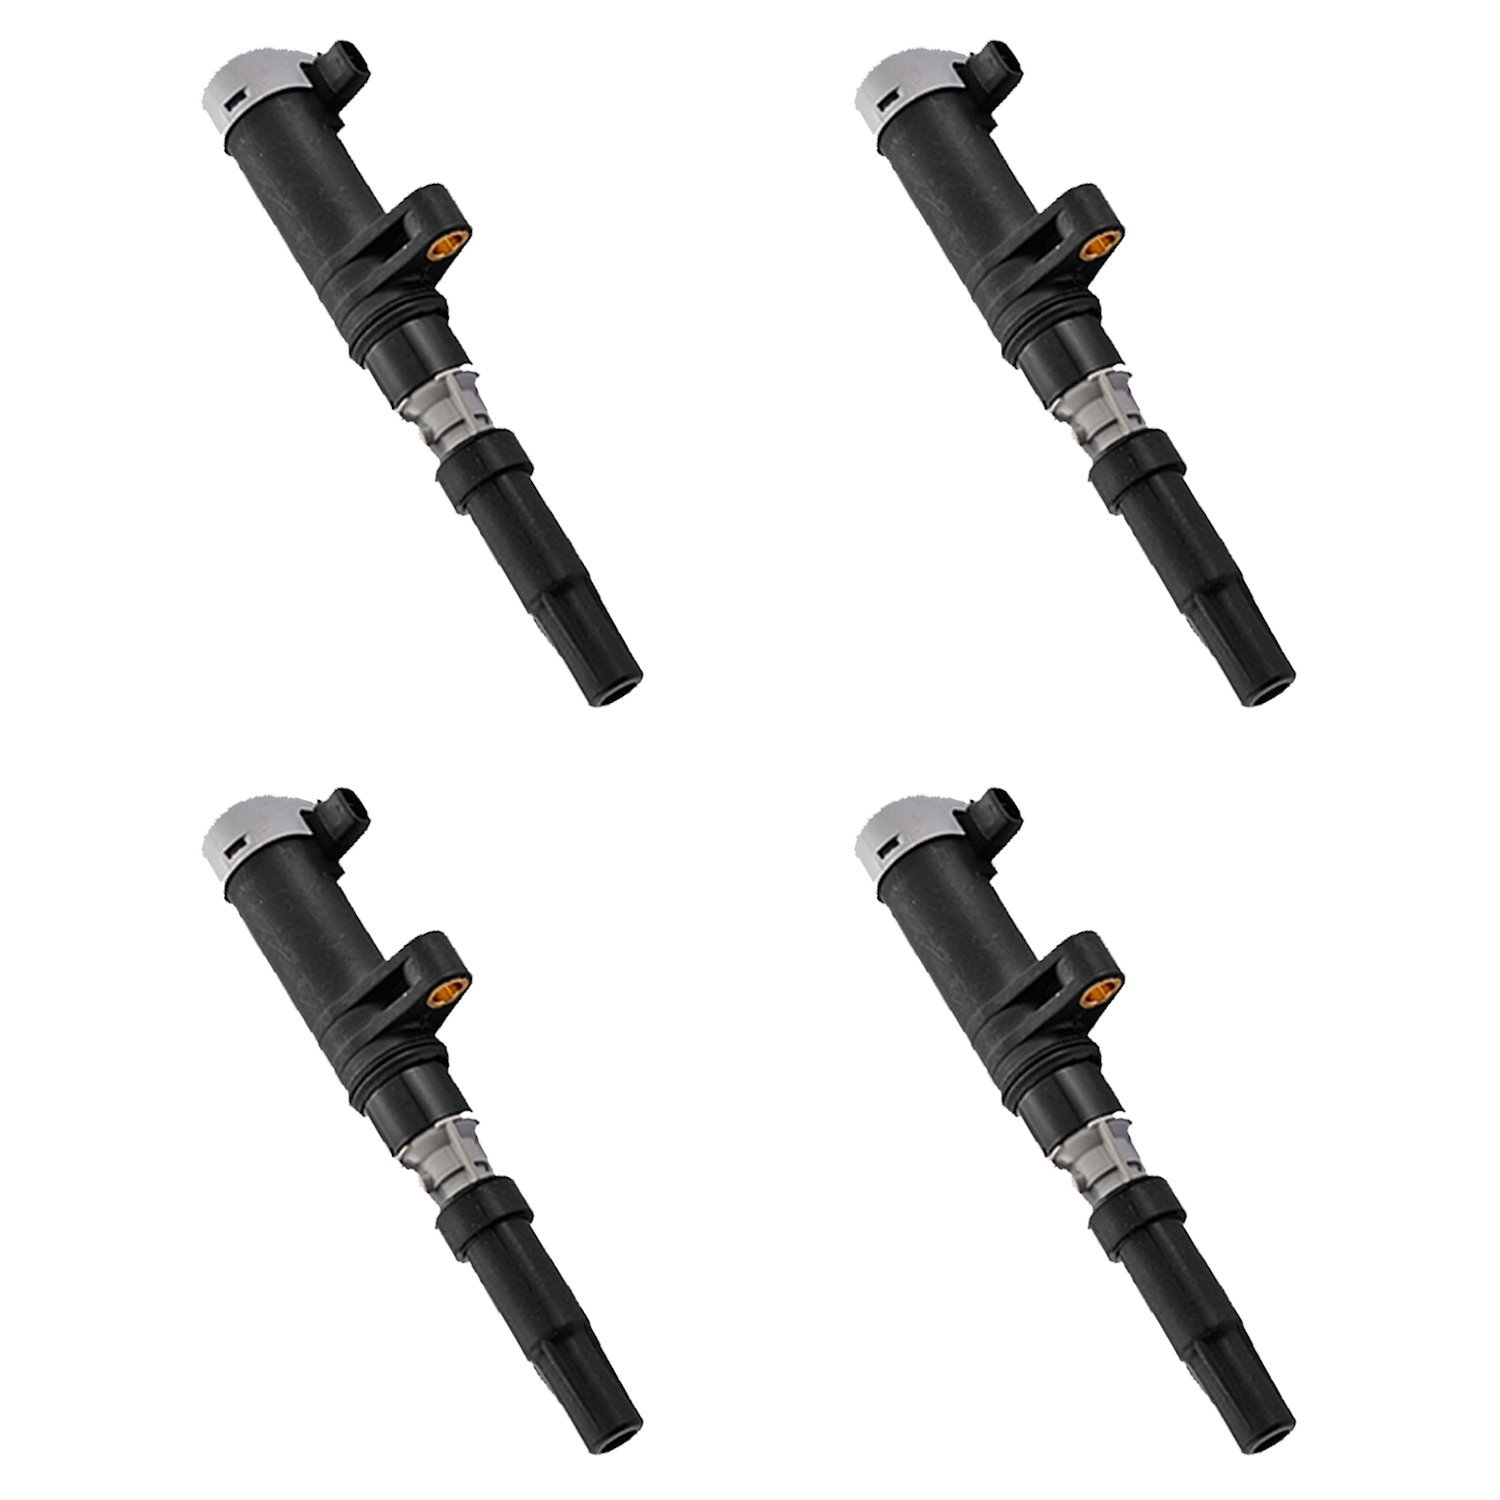 OE Replacement Ignition Coils for Toyota Tundra 2001-2009 4.7L V8